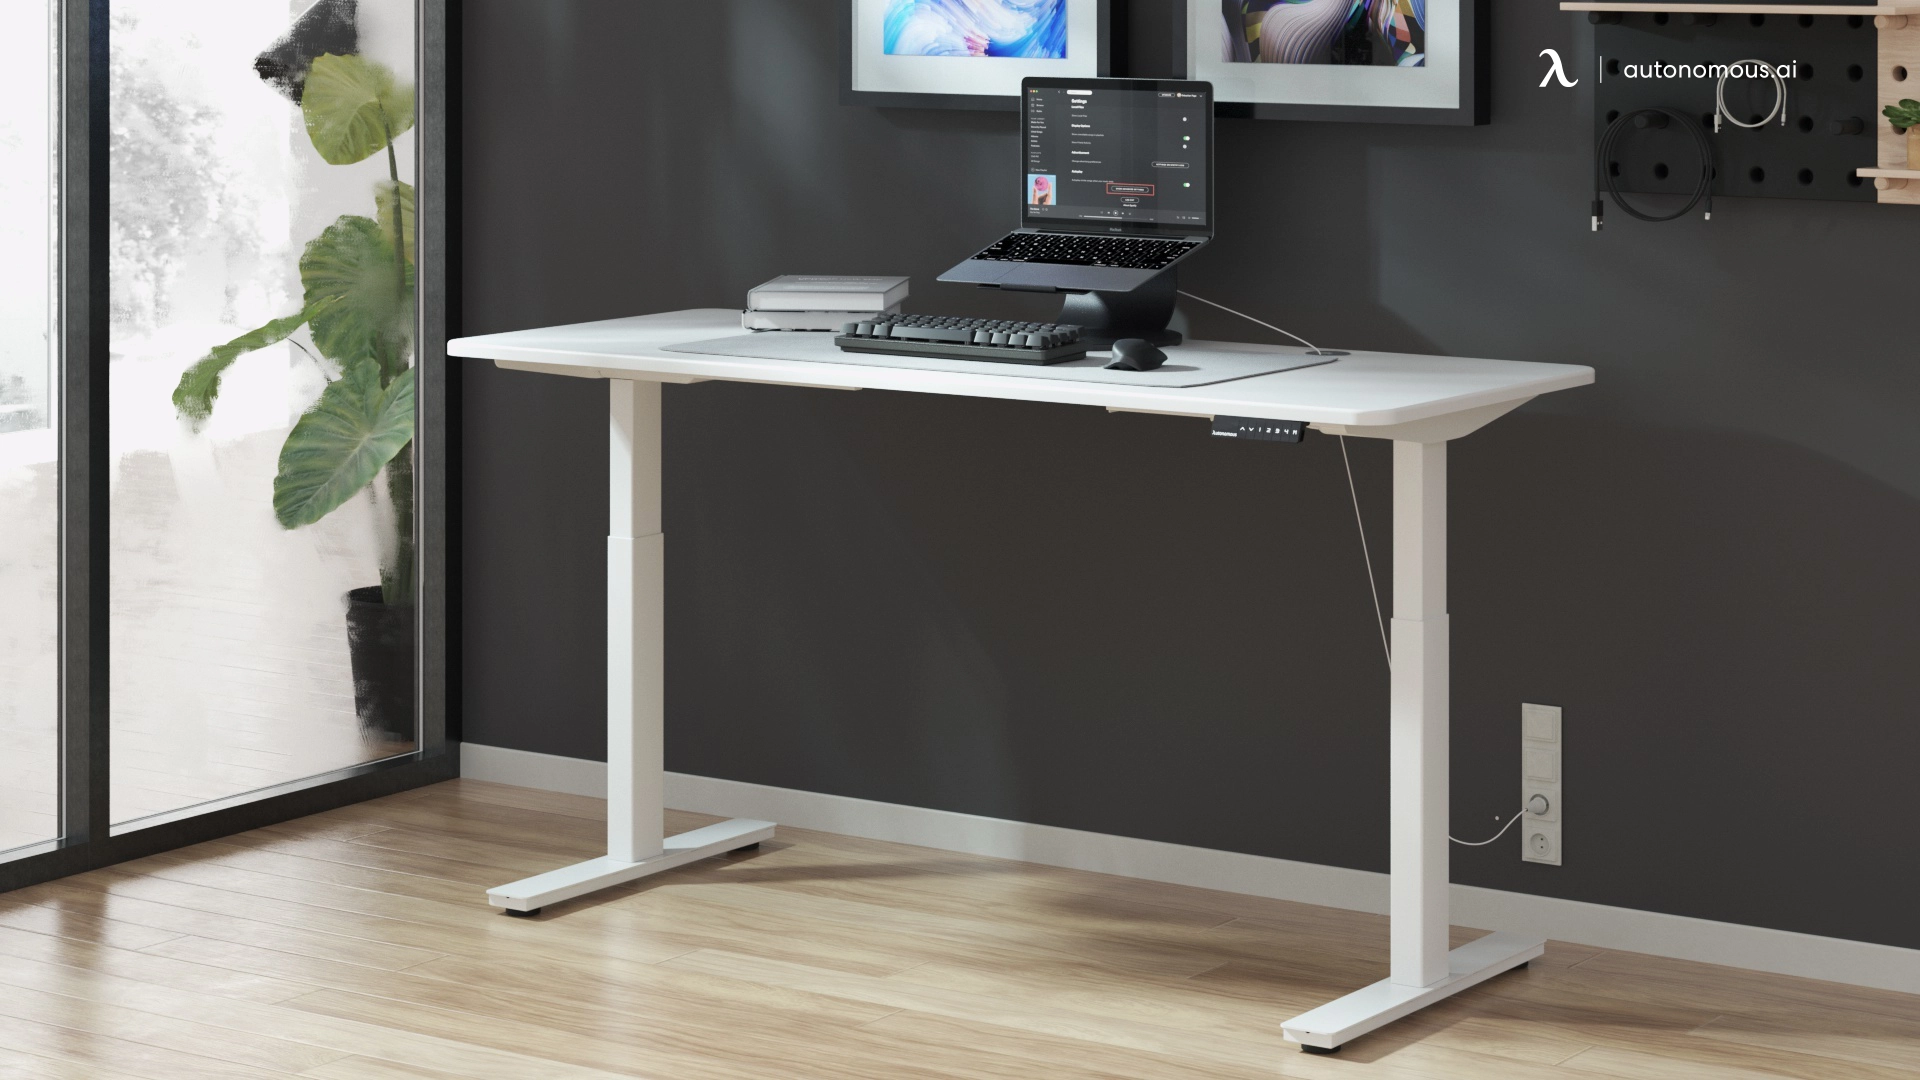 What's the Best Way to Make the Most of Standing Desk Deals?